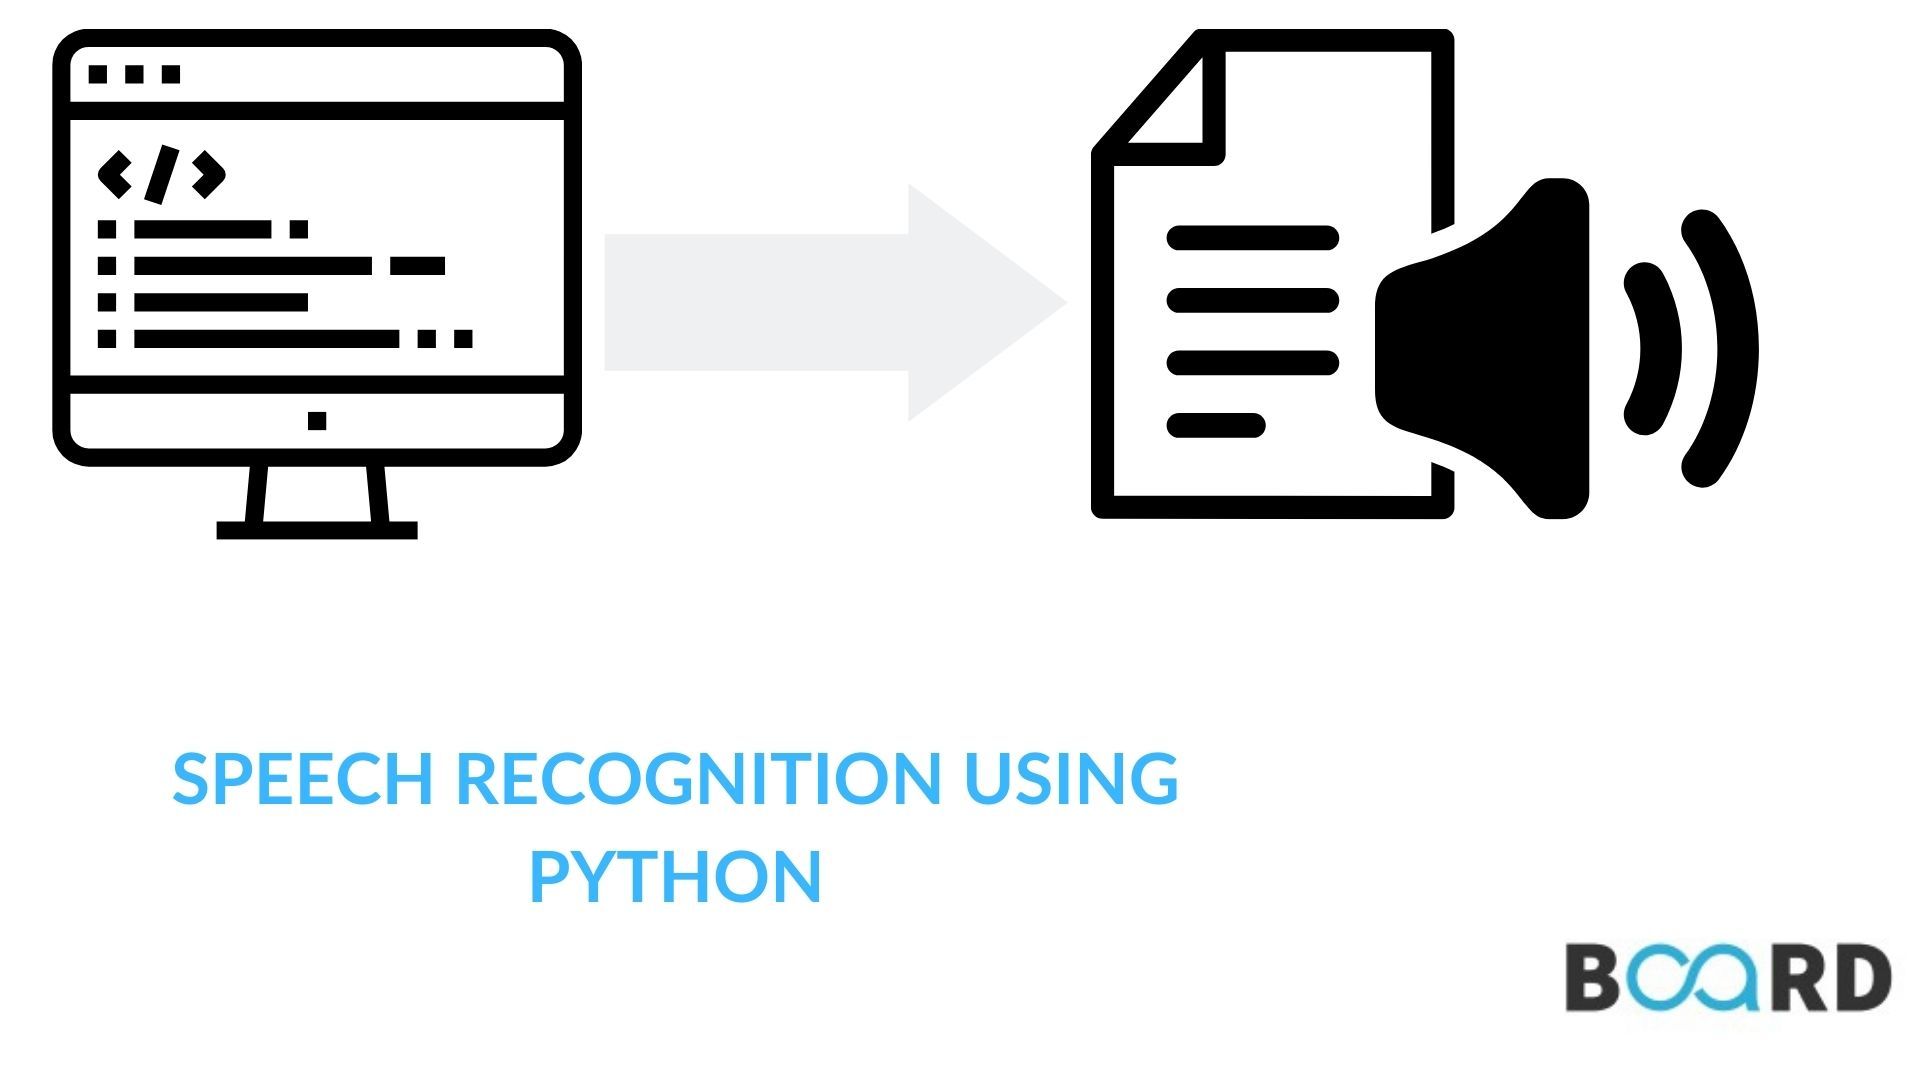 Doing Speech Recognition using Python